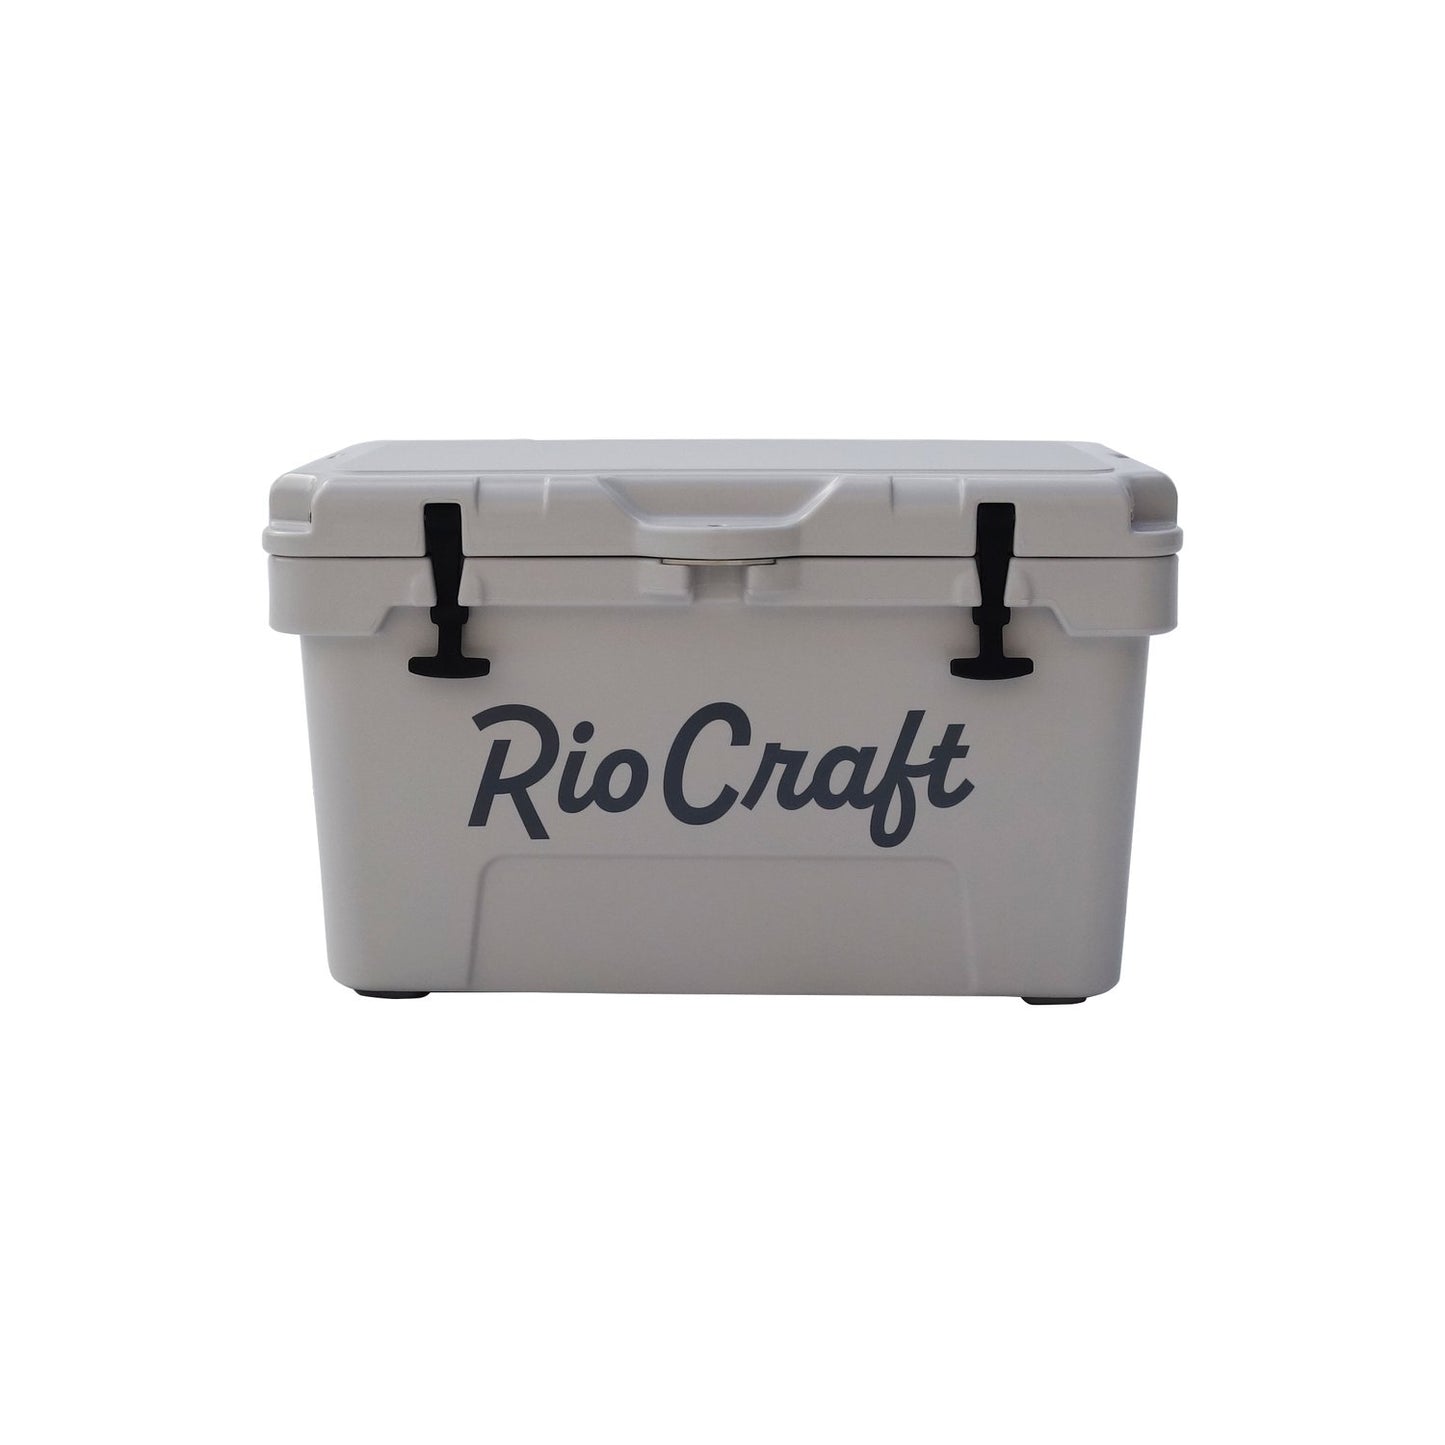 An ice-cold cooler with the words "Rio Craft" on it.